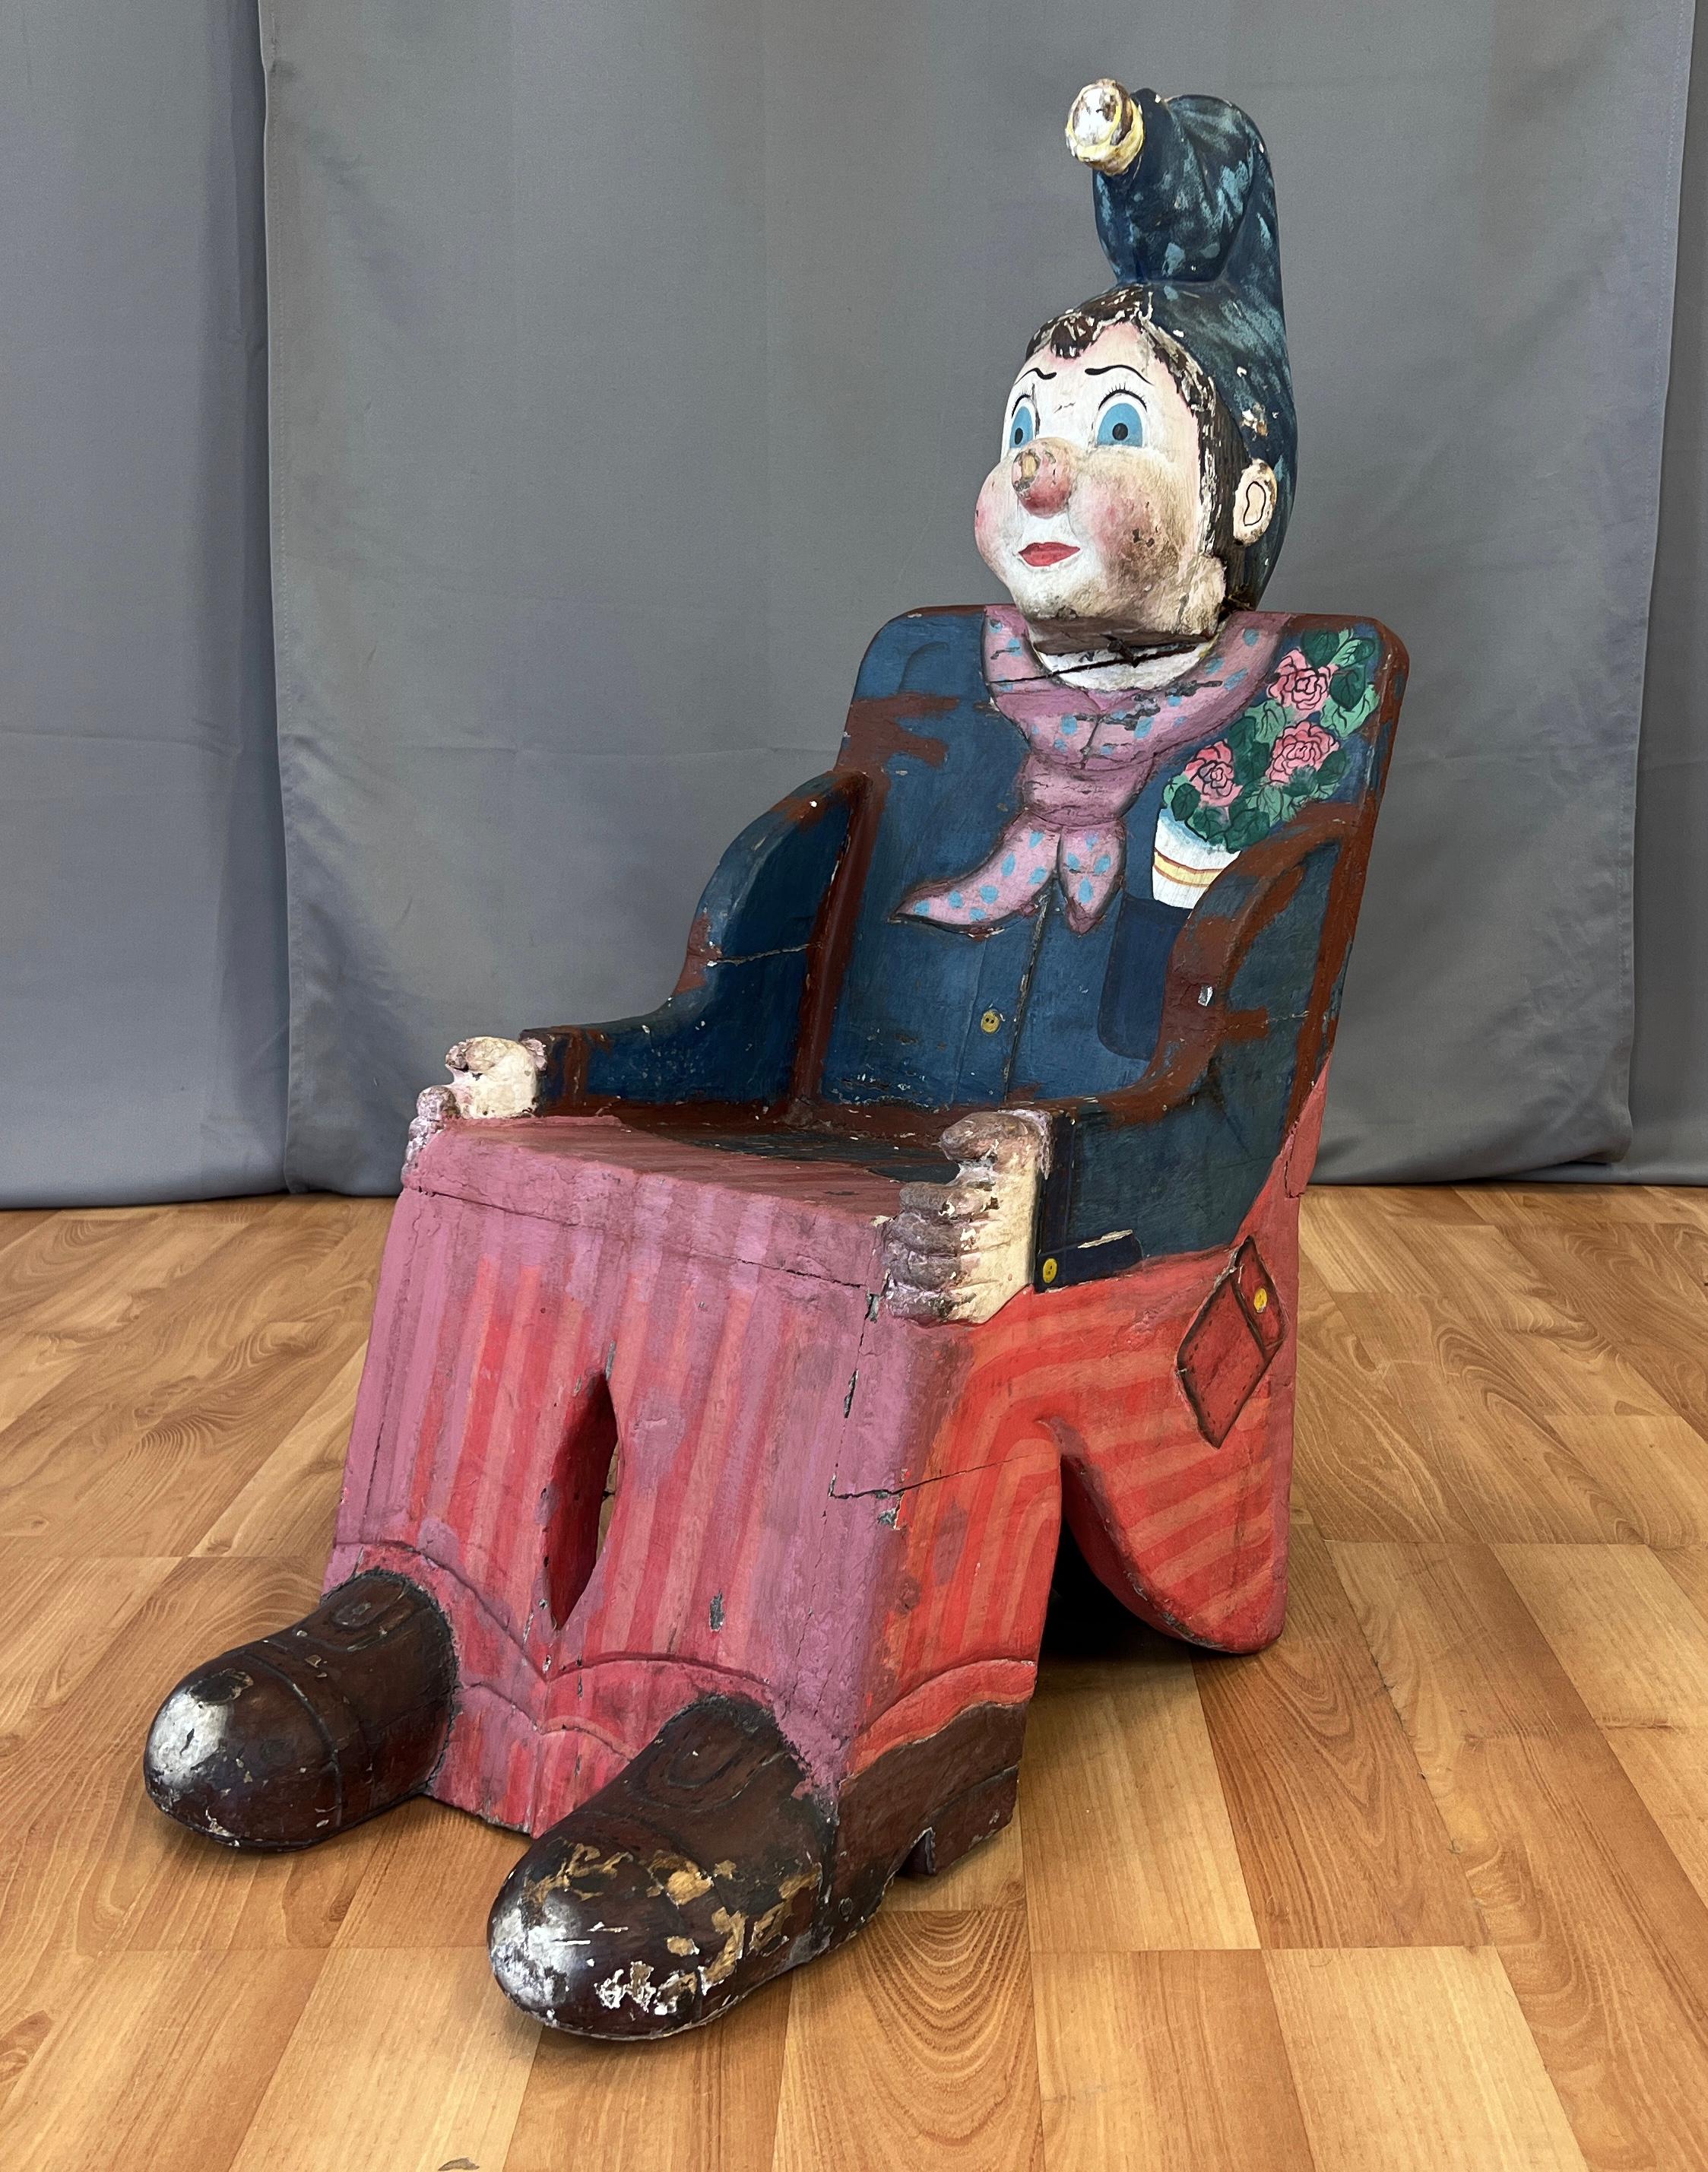 A wonderful whimsical circa 1950s French Childs Carnival and/or Circus prop chair.
Carved parts, feet, hands and head with big blue eyes and top it off a fun blue hat falling forward.
The wooden chair's paint has faded over the years but still has